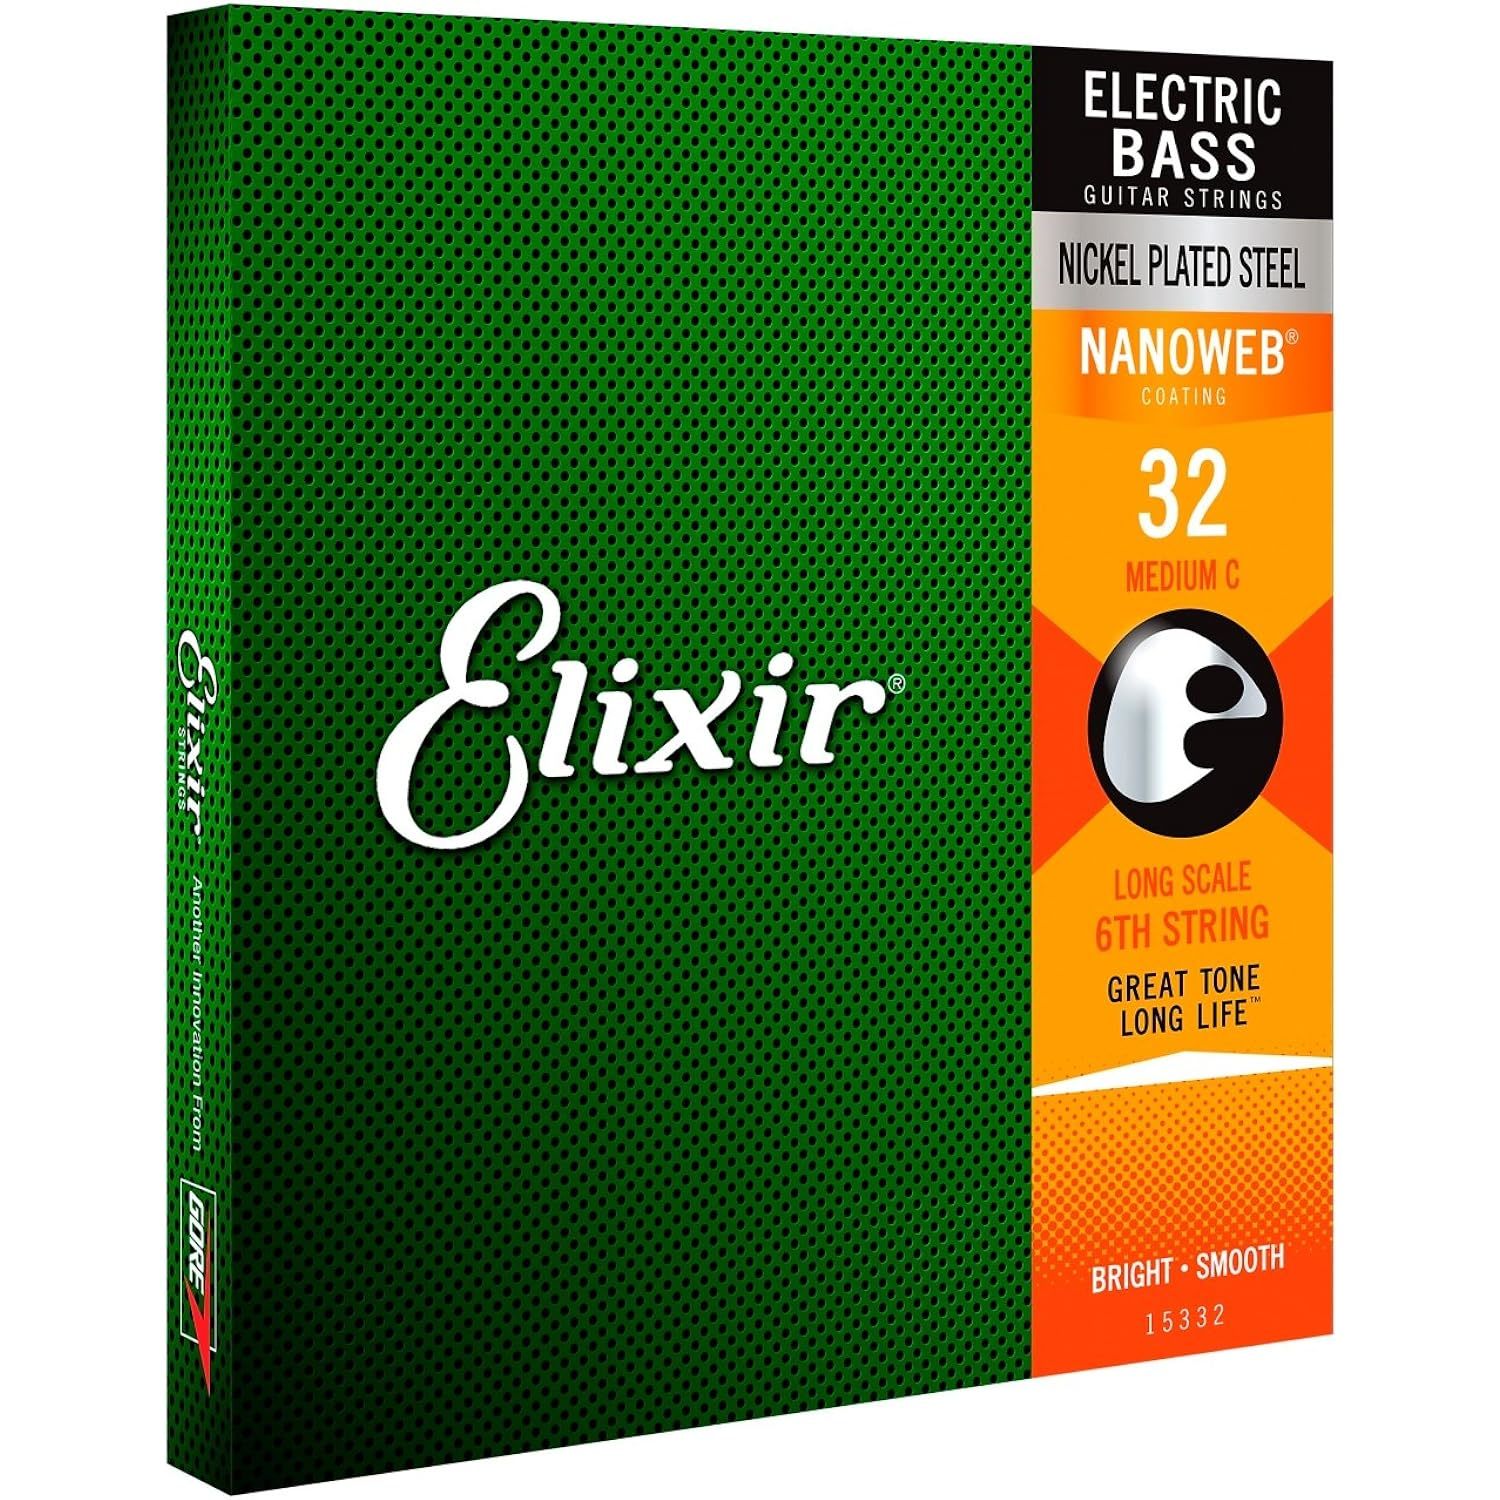 Primary image for Elixir Strings Nickel Plated Steel with NANOWEB Coating, Custom Bass 6th String 